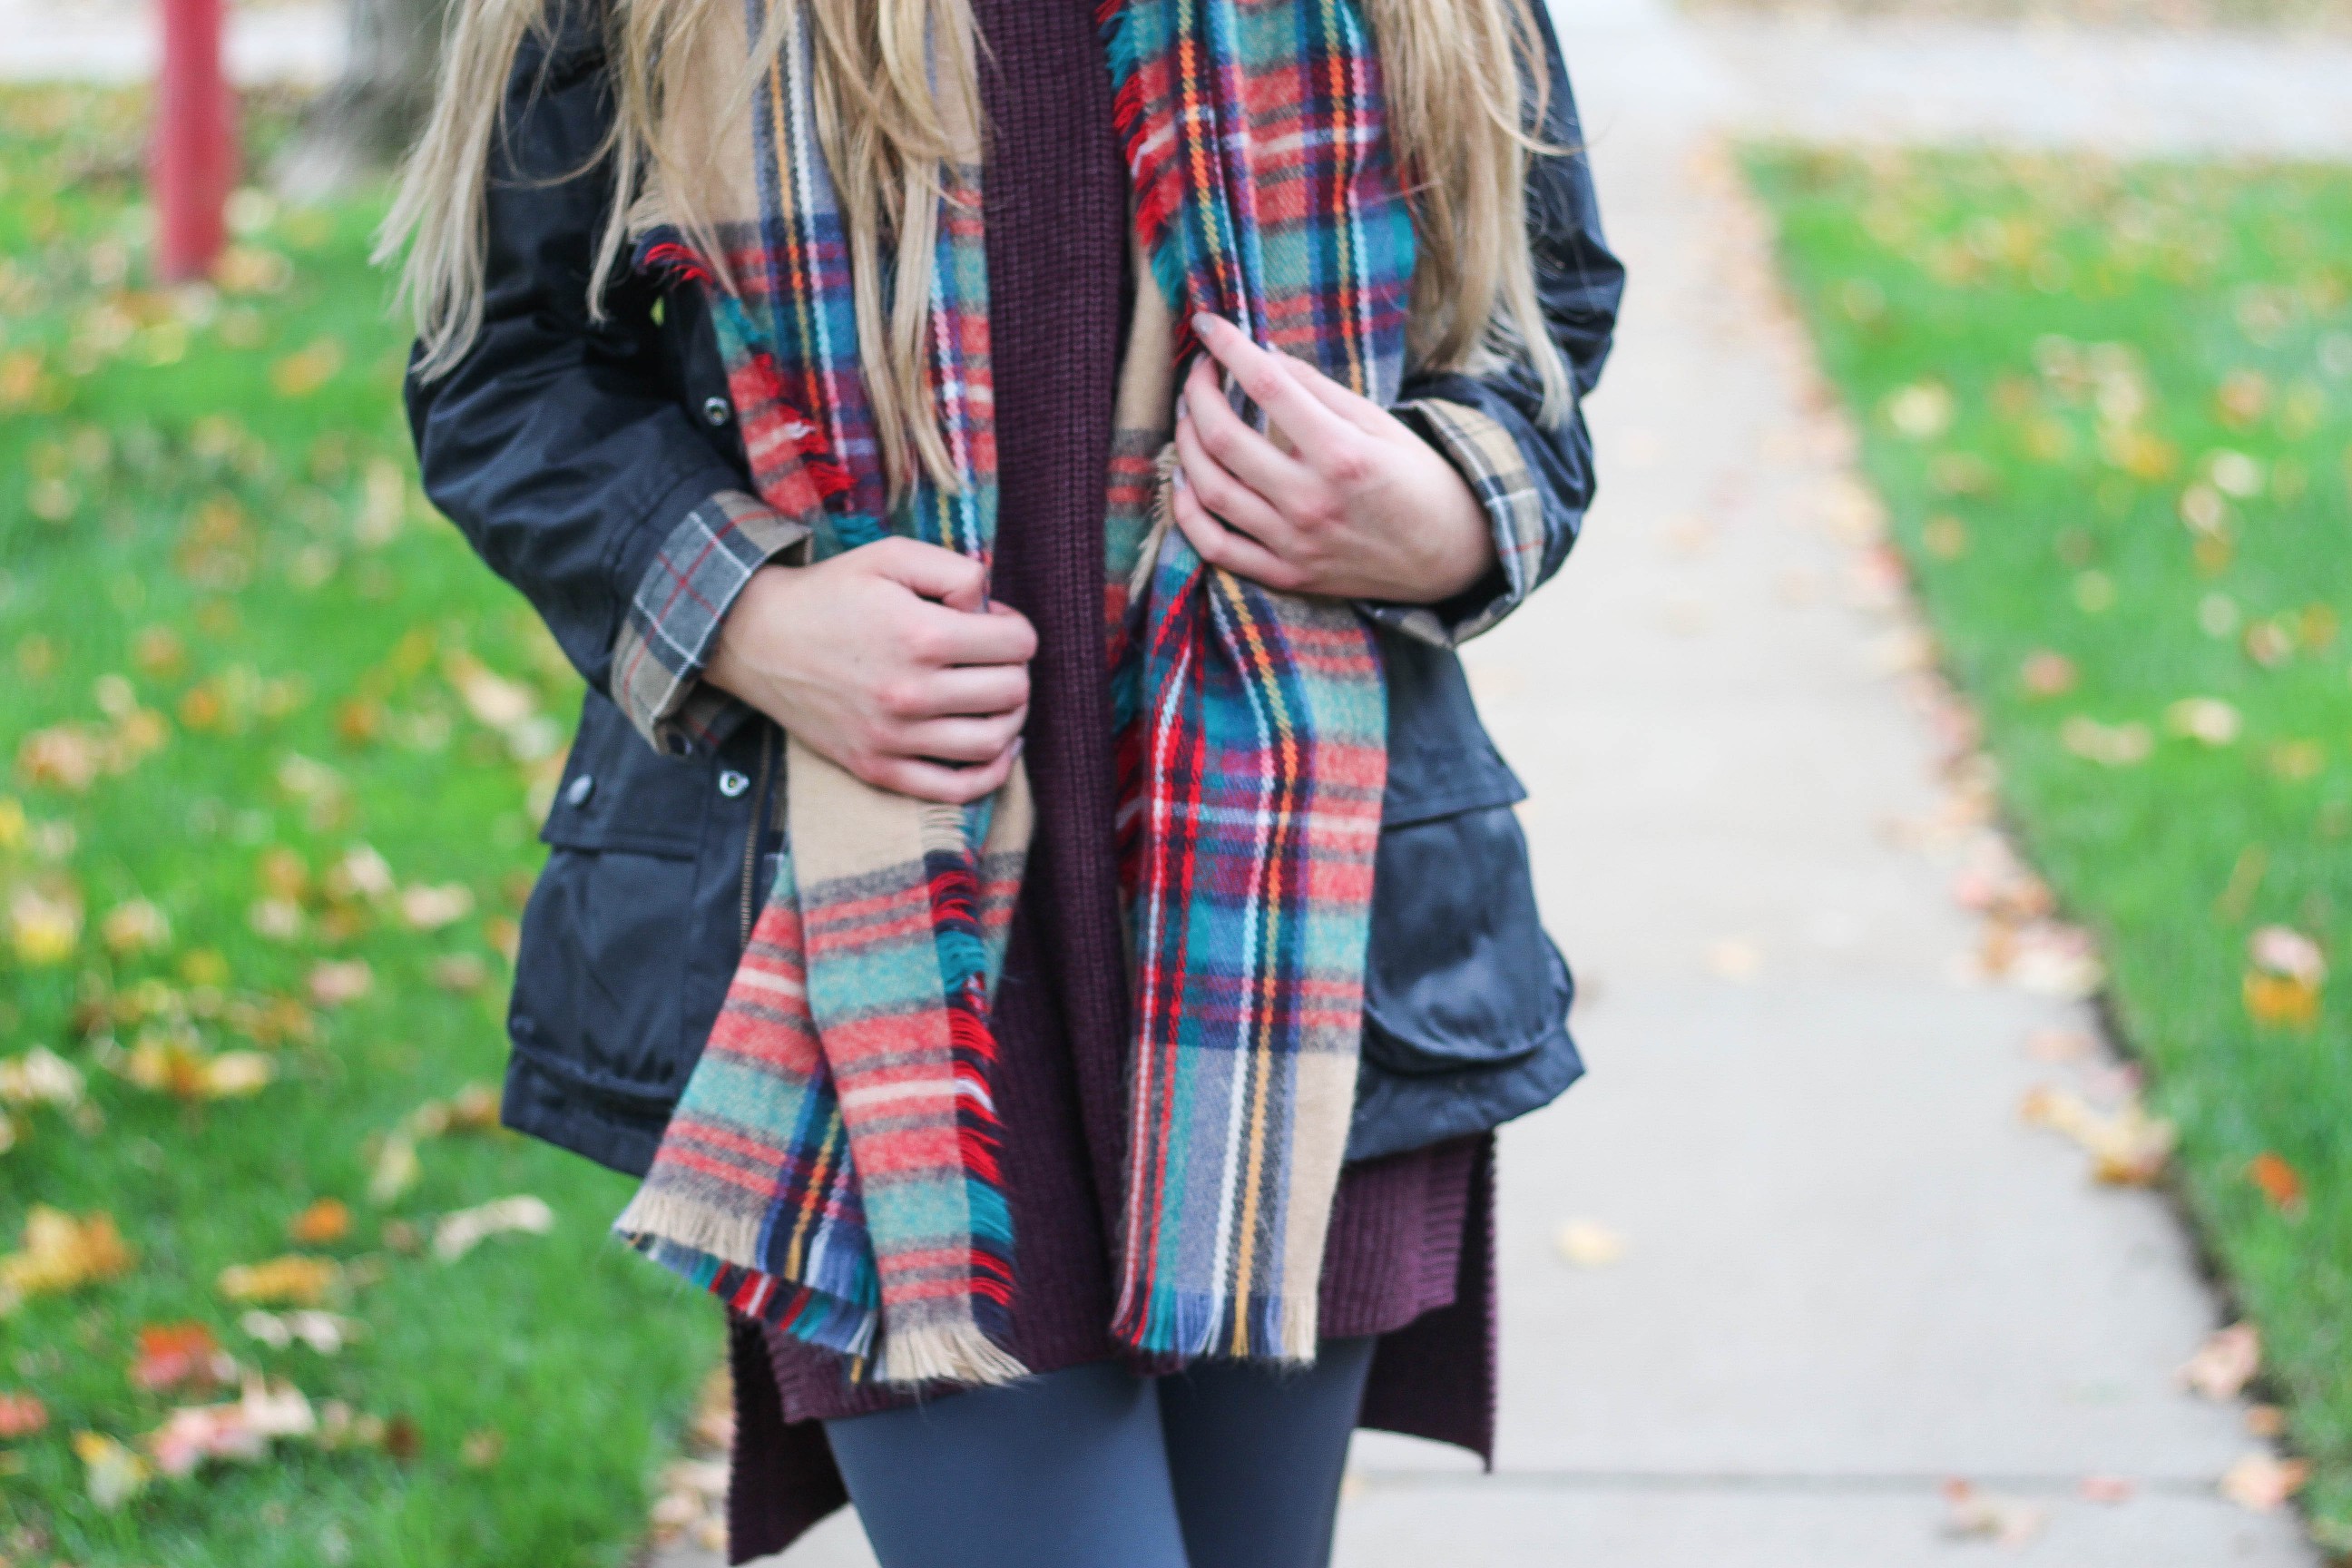 Barbour coats and blanket scarves are perfect for fall, see it on the blog daily dose of charm by lauren lindmark dailydoseofcharm.com